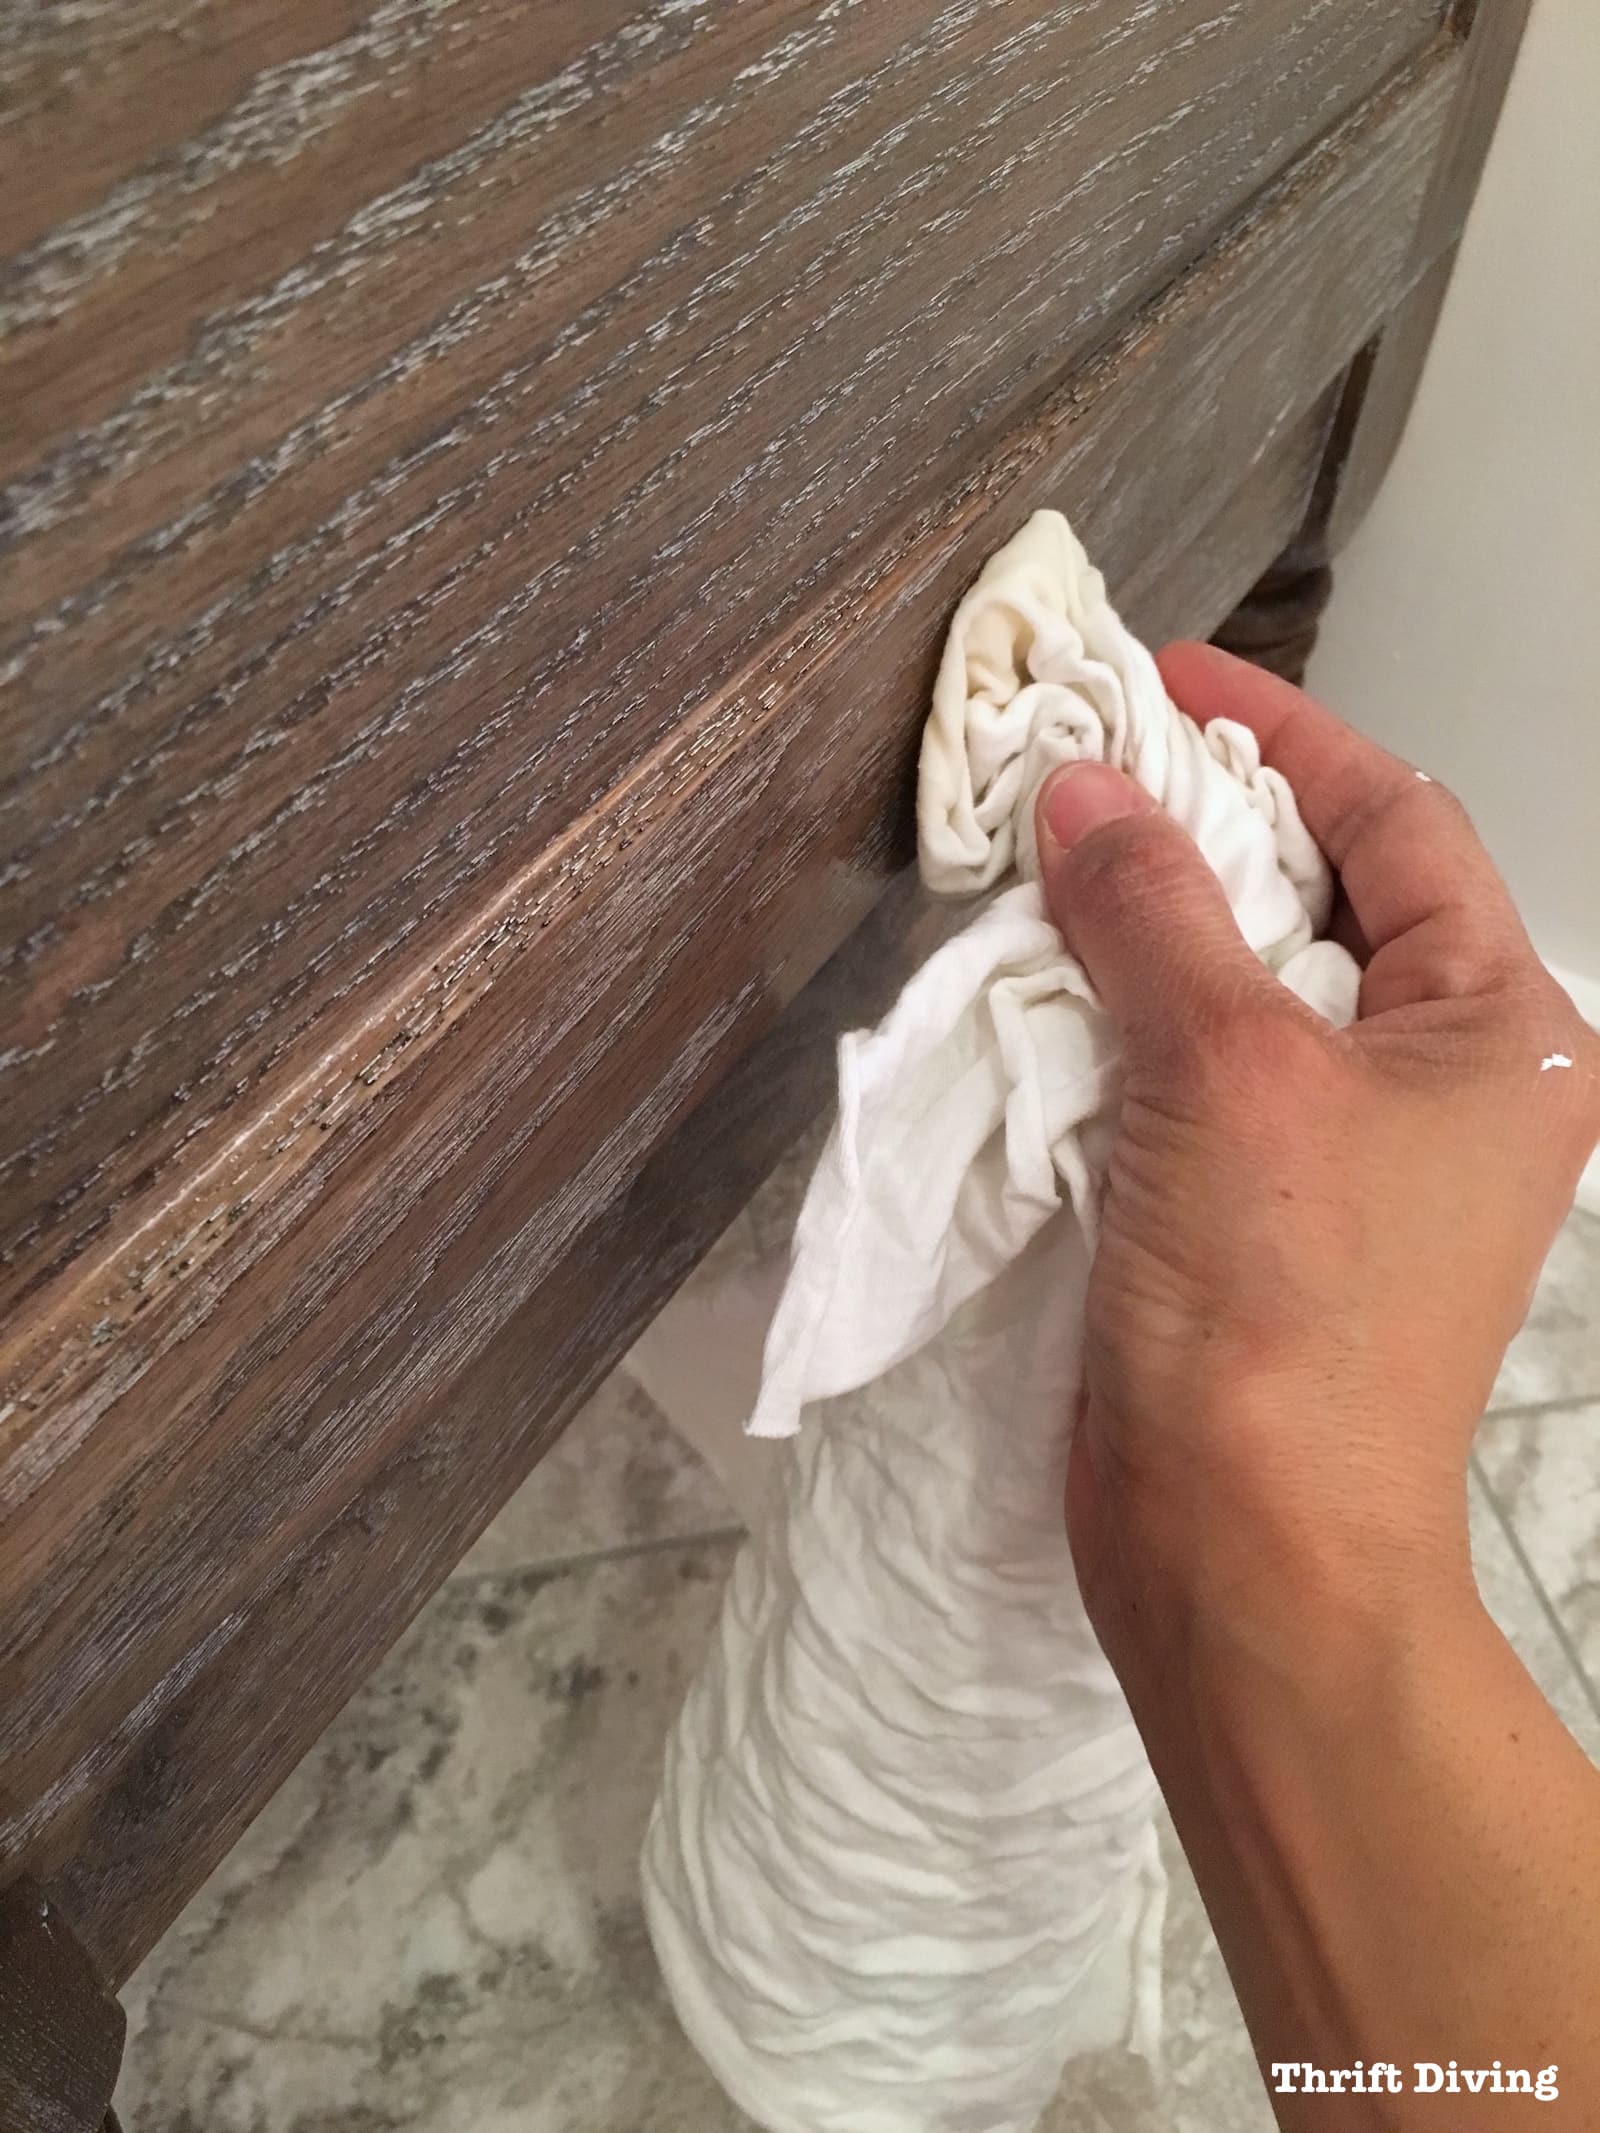 Build-a-DIY-bathroom-vanity-how-to-finish-oak - Fiddes and sons wax finish